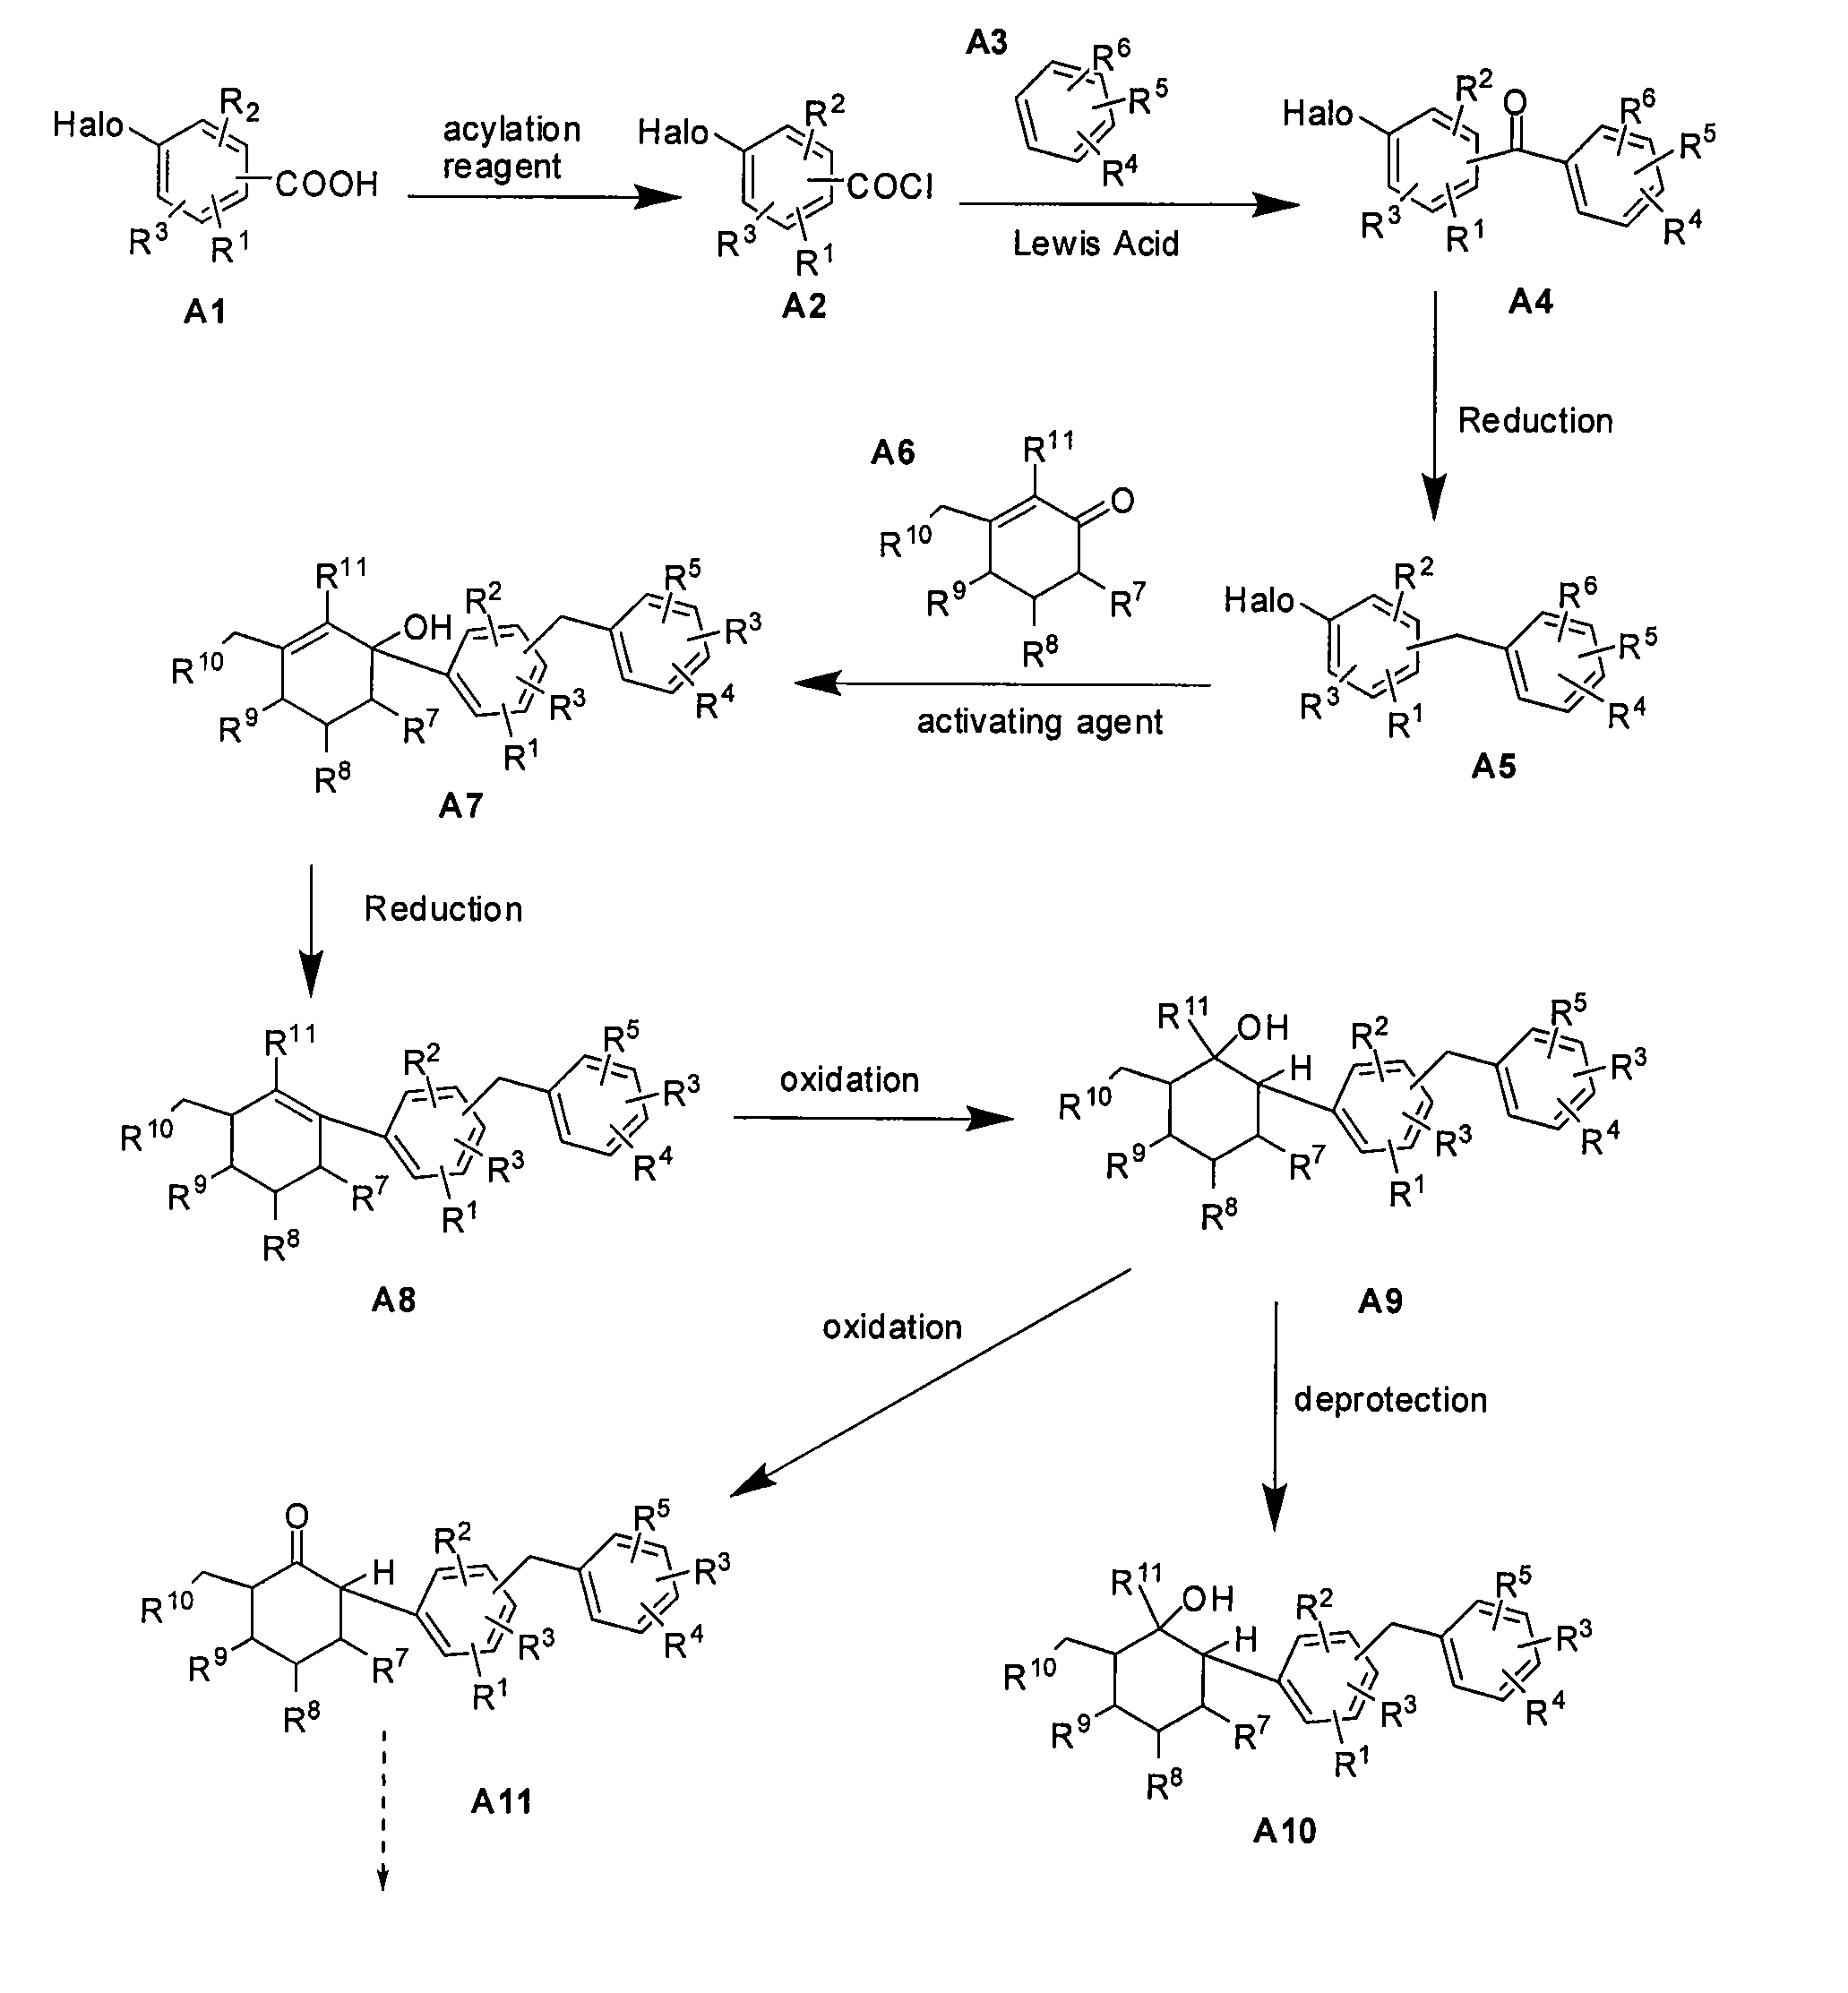 Benzylphenyl cyclohexane derivatives and methods of use